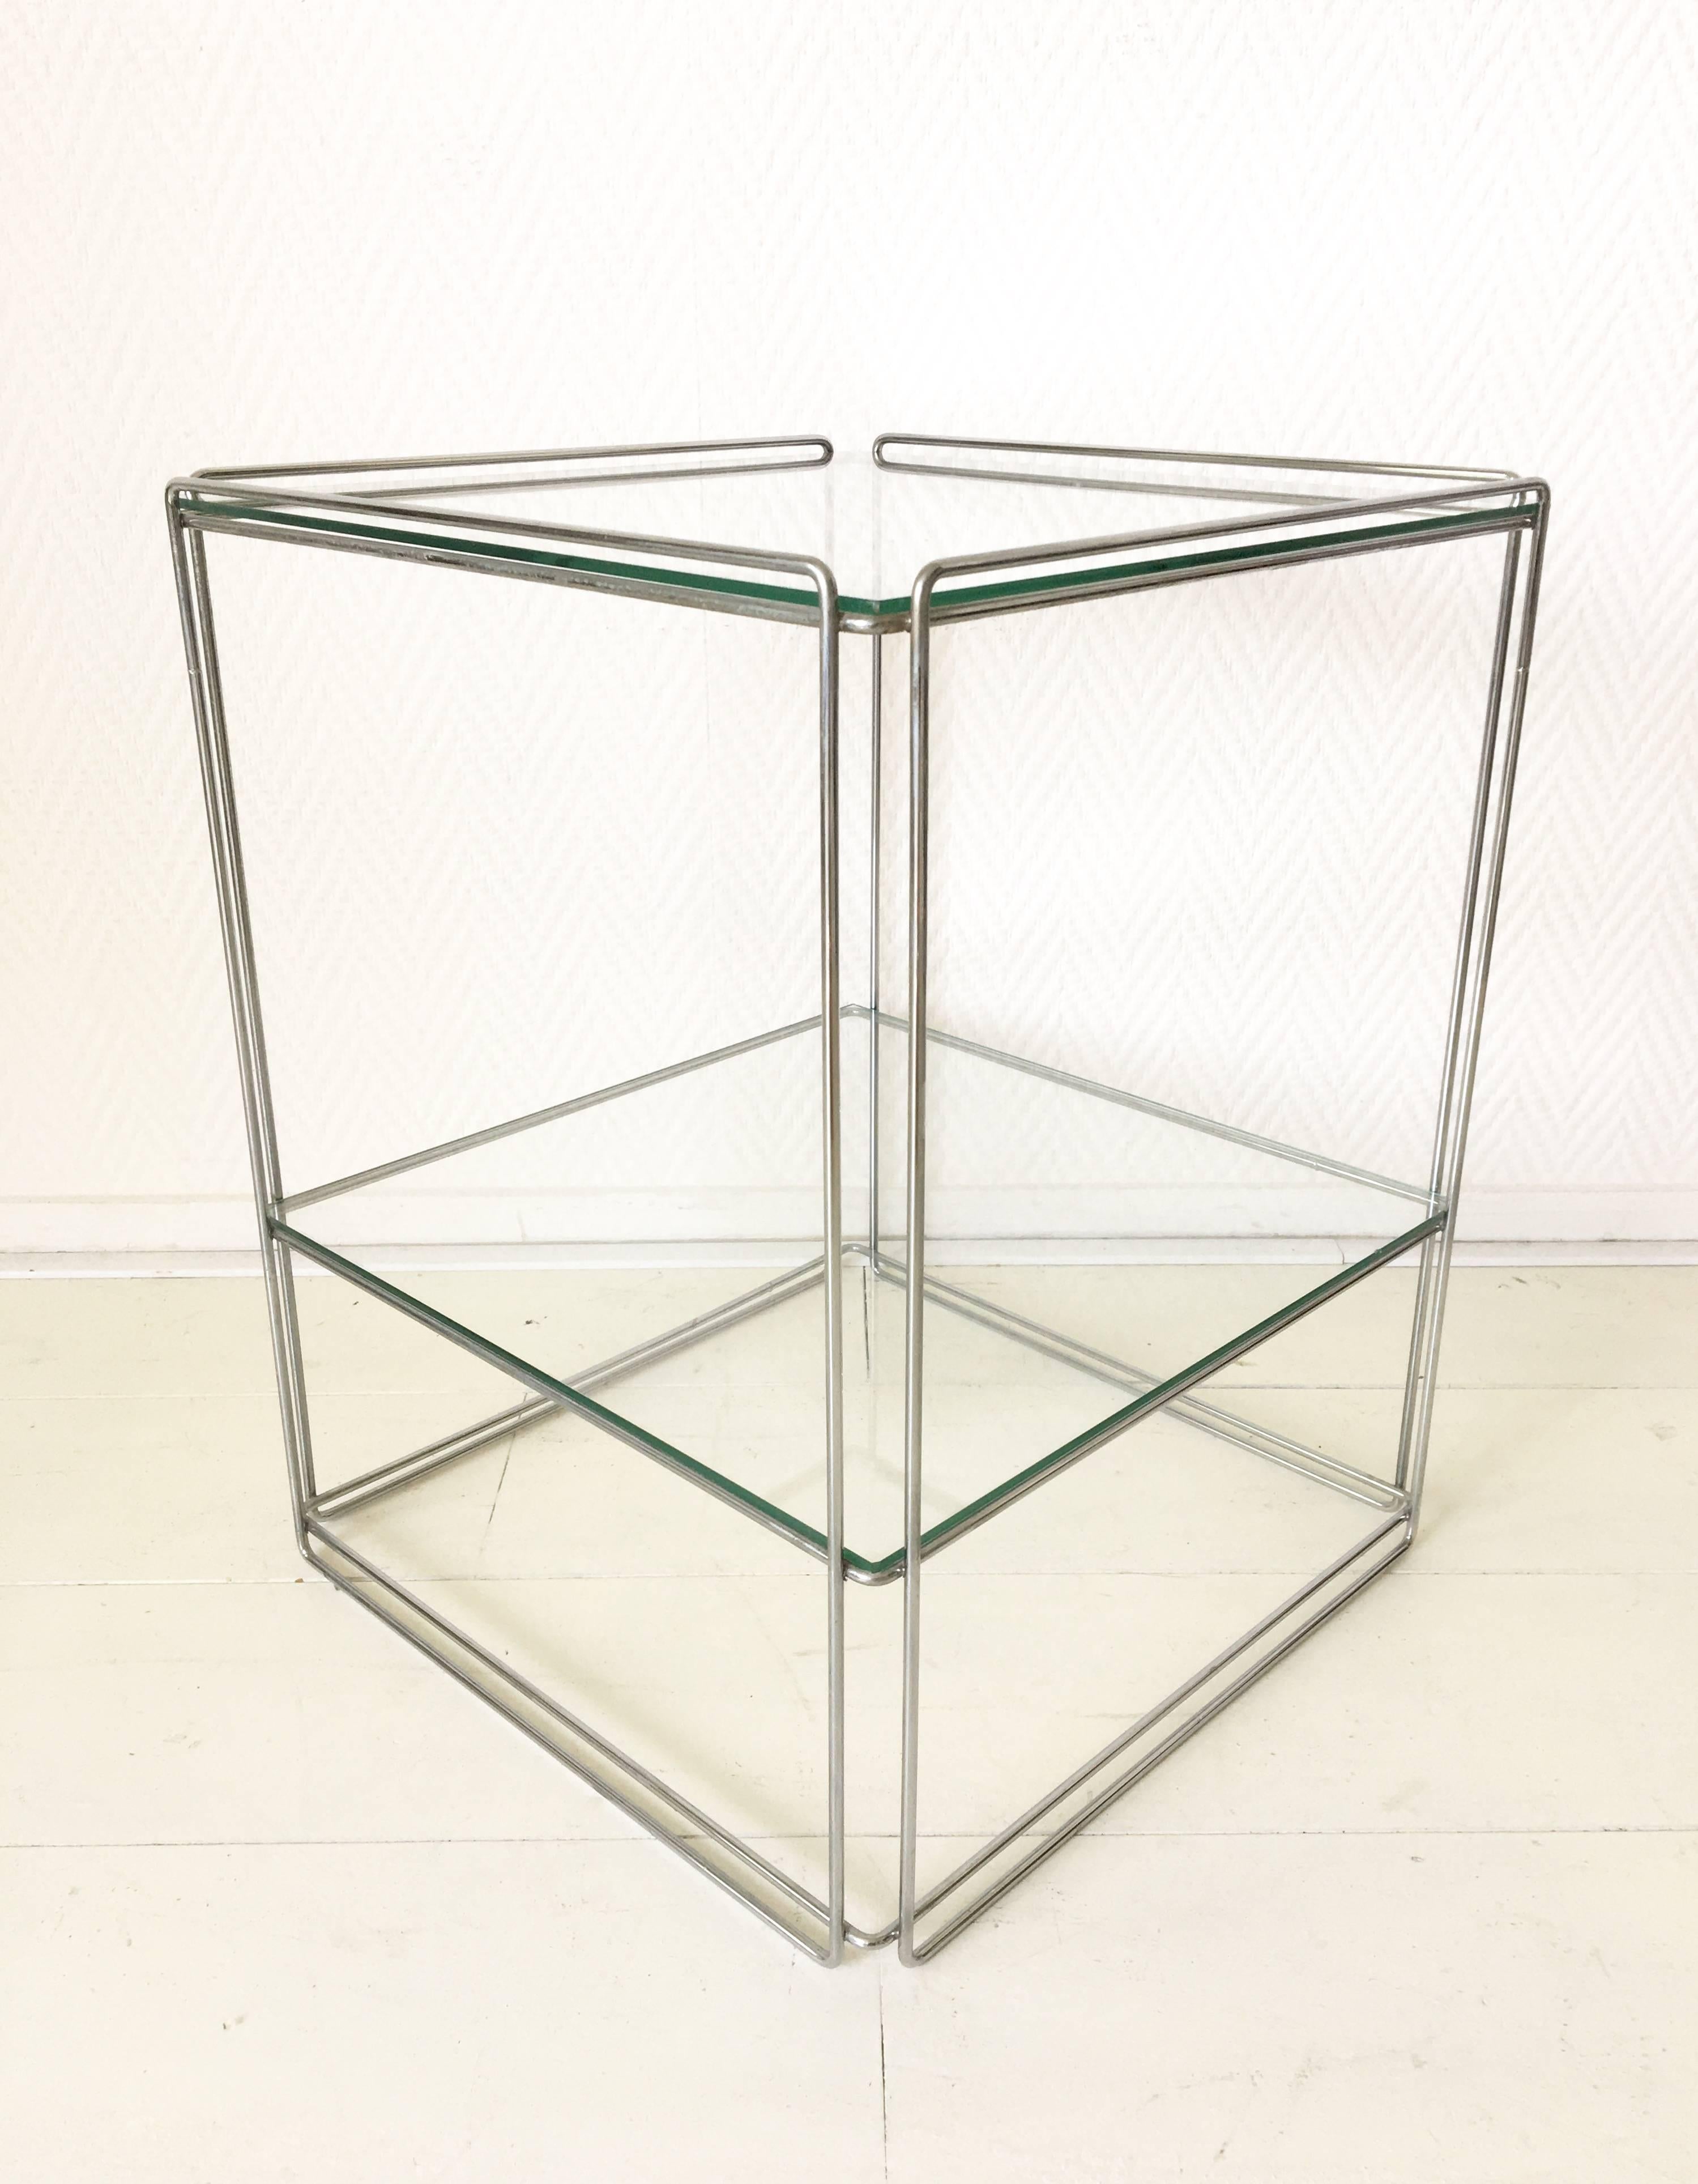 Beautiful minimalist design by Max Sauze for Max Sauze Studio, circa 1960s. This table features a silver colored metal base and two glass 'shelves'. One of them had a very small chip of the glass which, luckily, is barely to be seen. Overall this